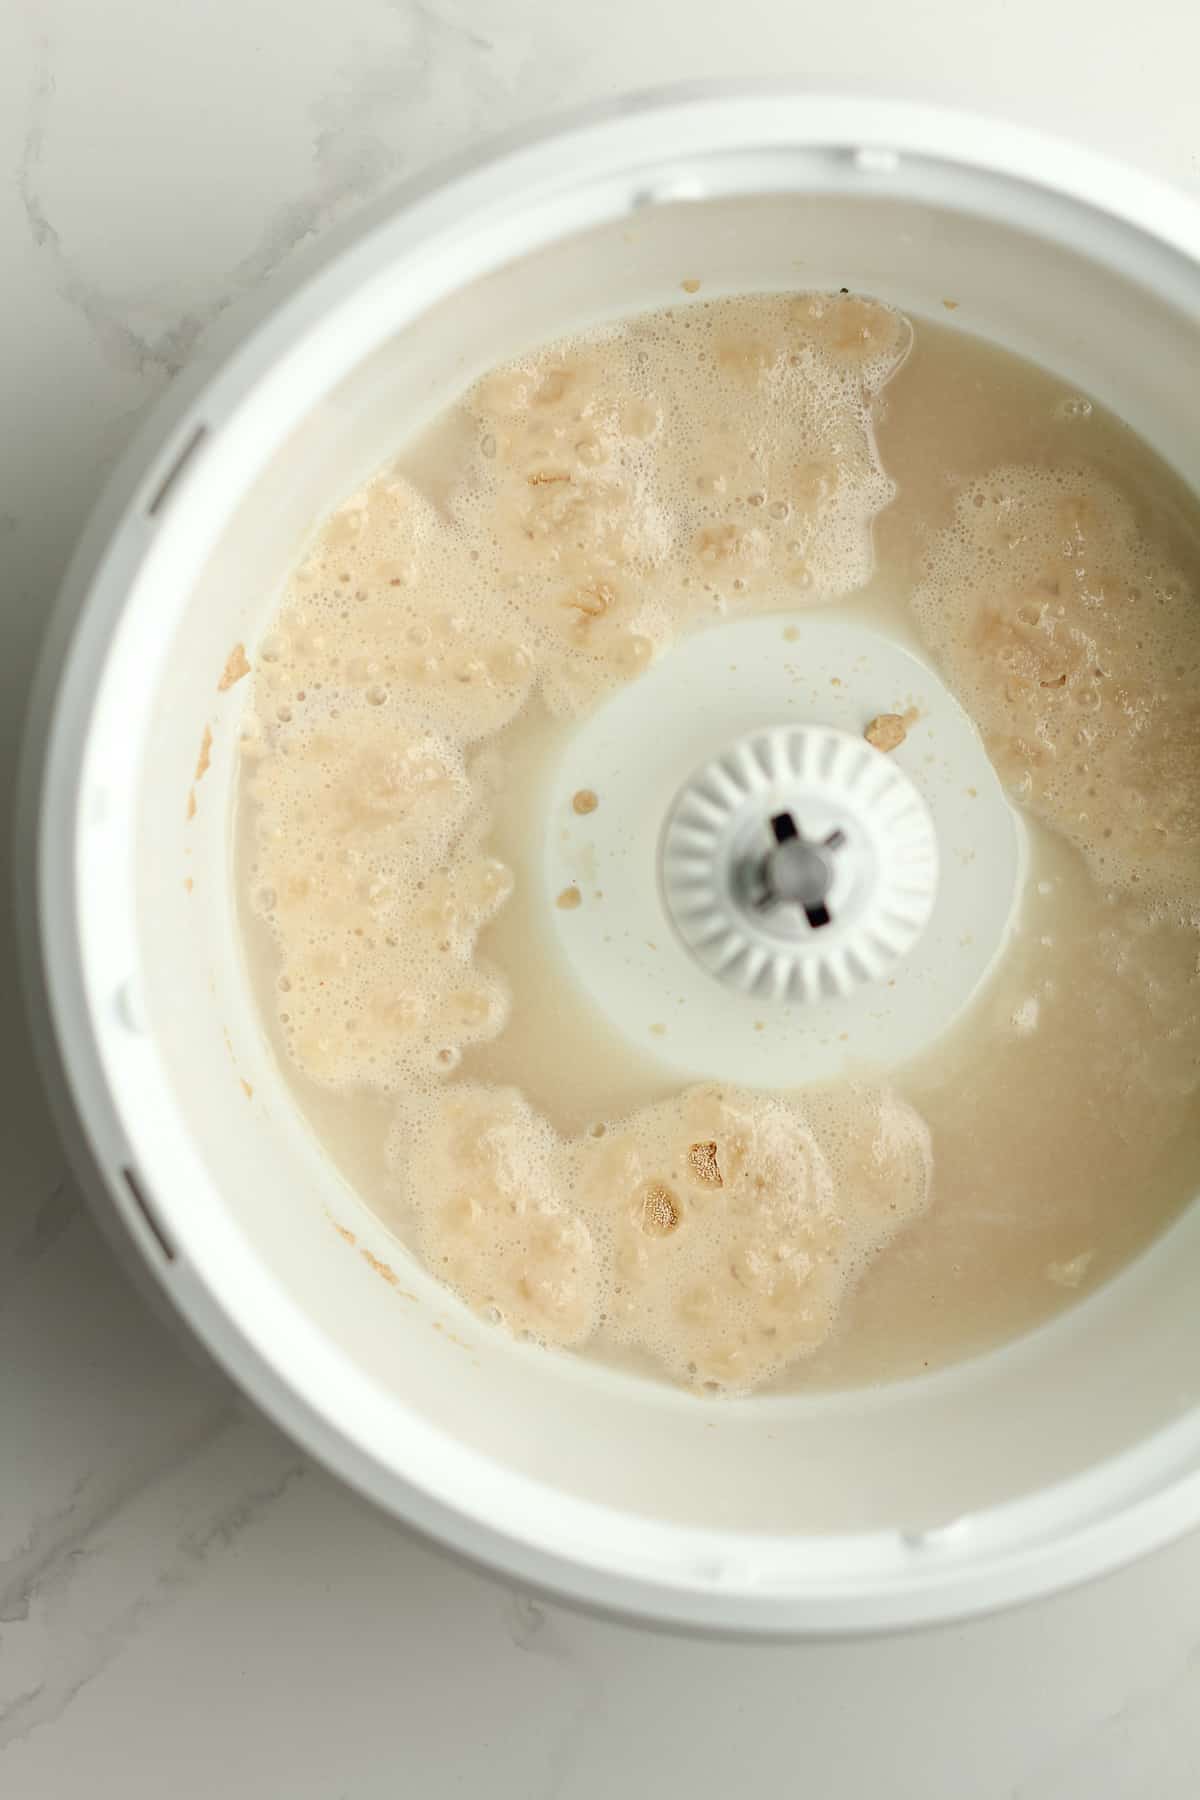 A mixer with the bubbly yeast mixture.